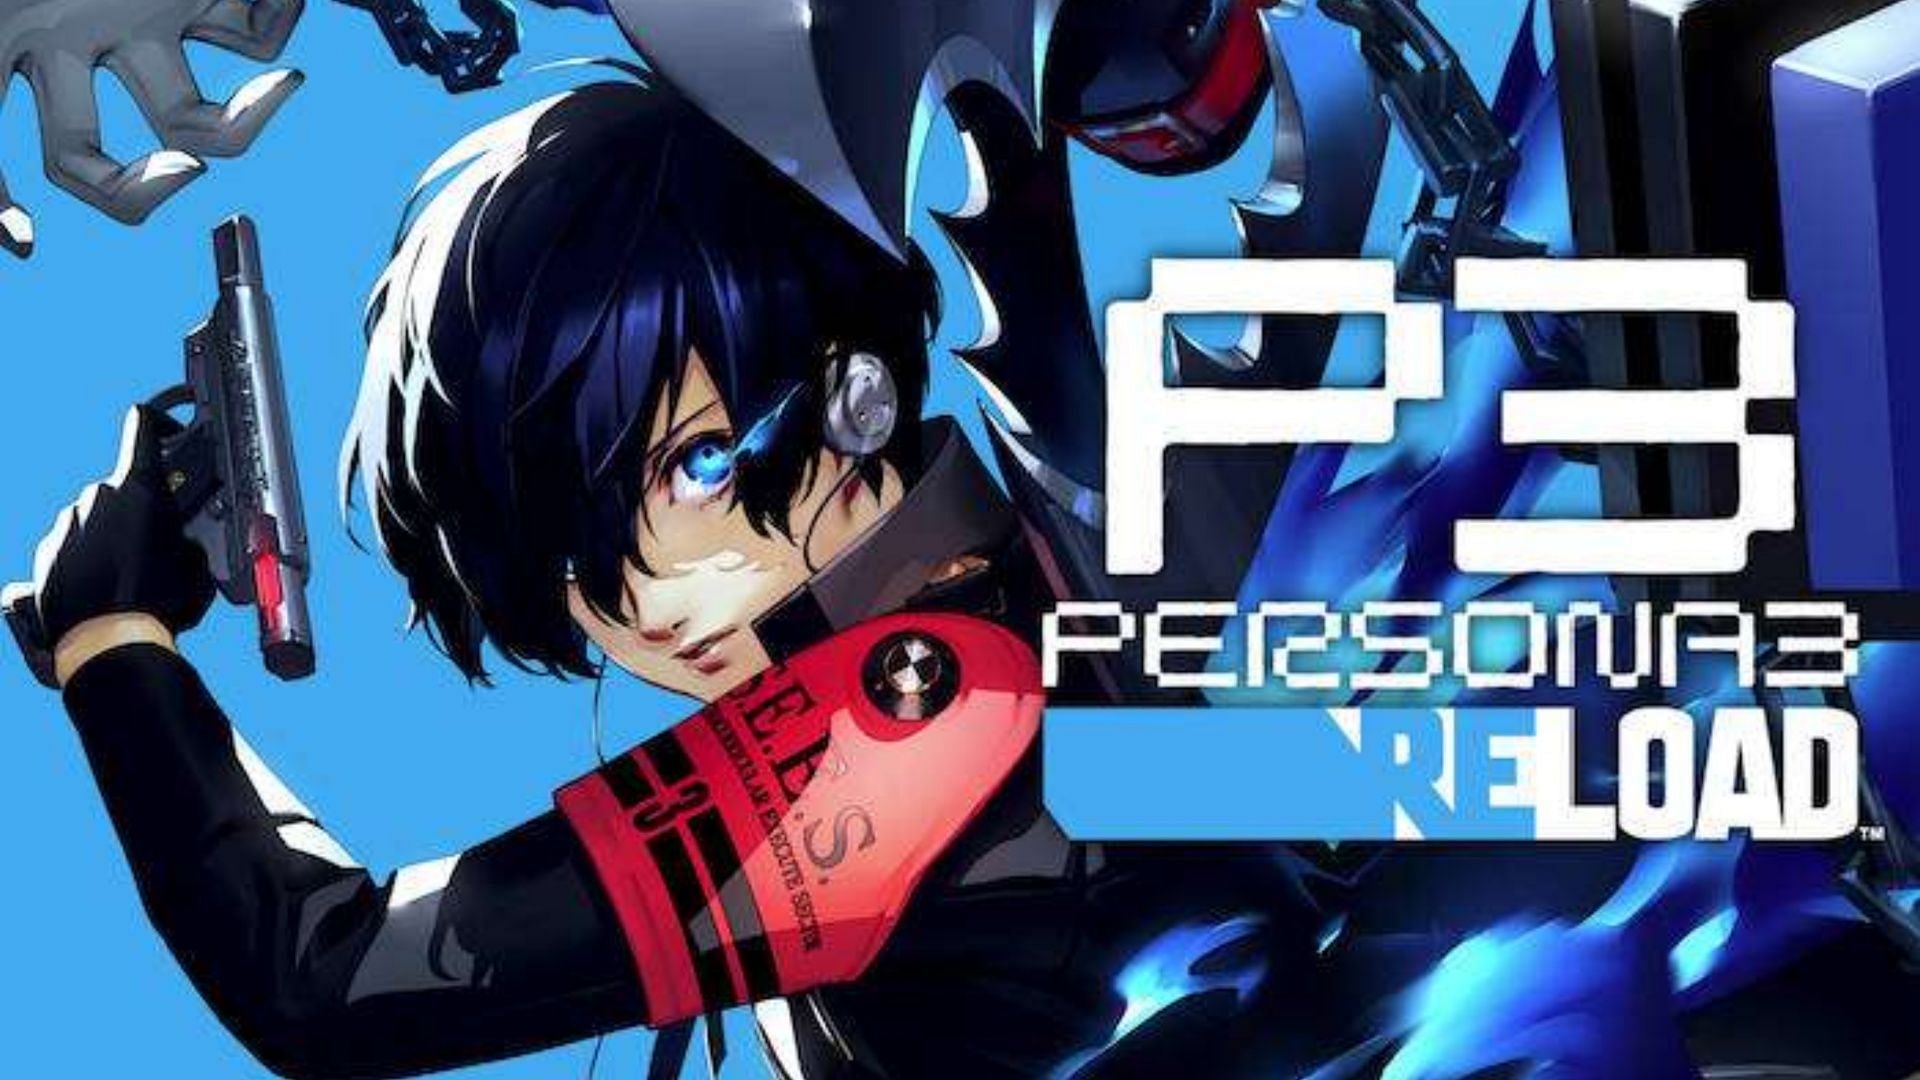 Female protagonist in Persona 3 Reload